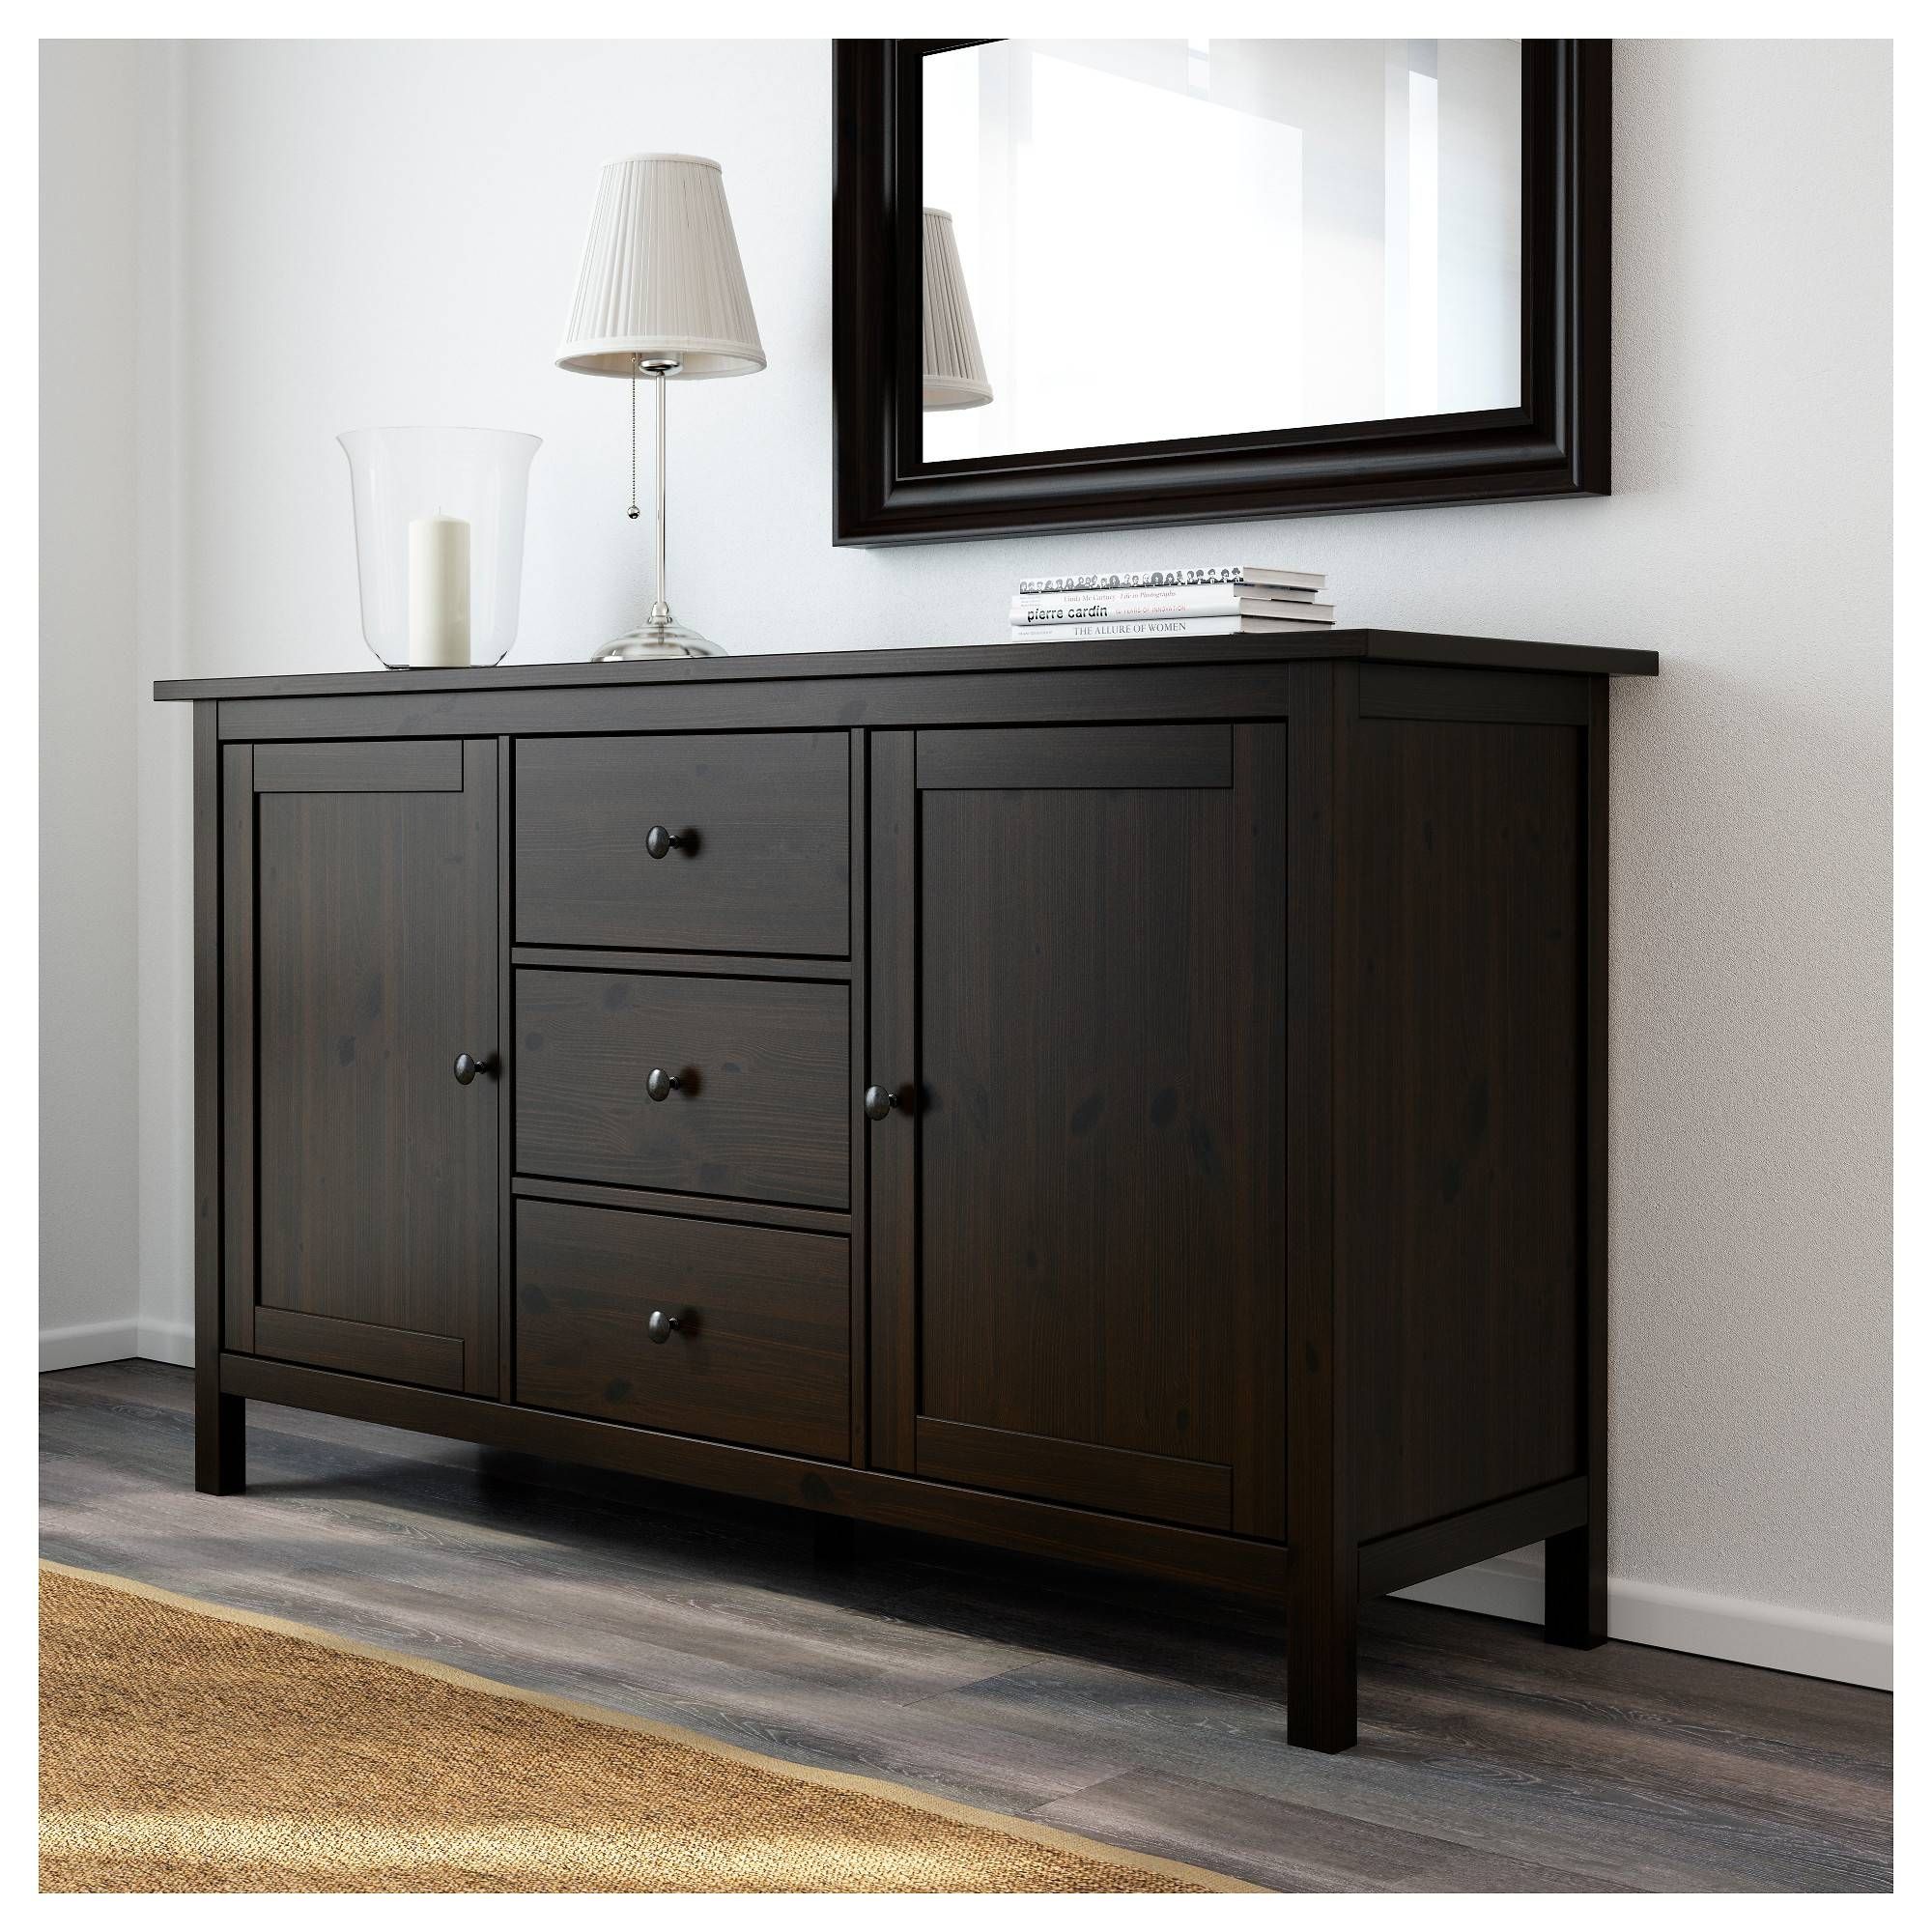 Hemnes Sideboard – White Stain – Ikea Within 2018 Dark Wood Sideboards (View 7 of 15)